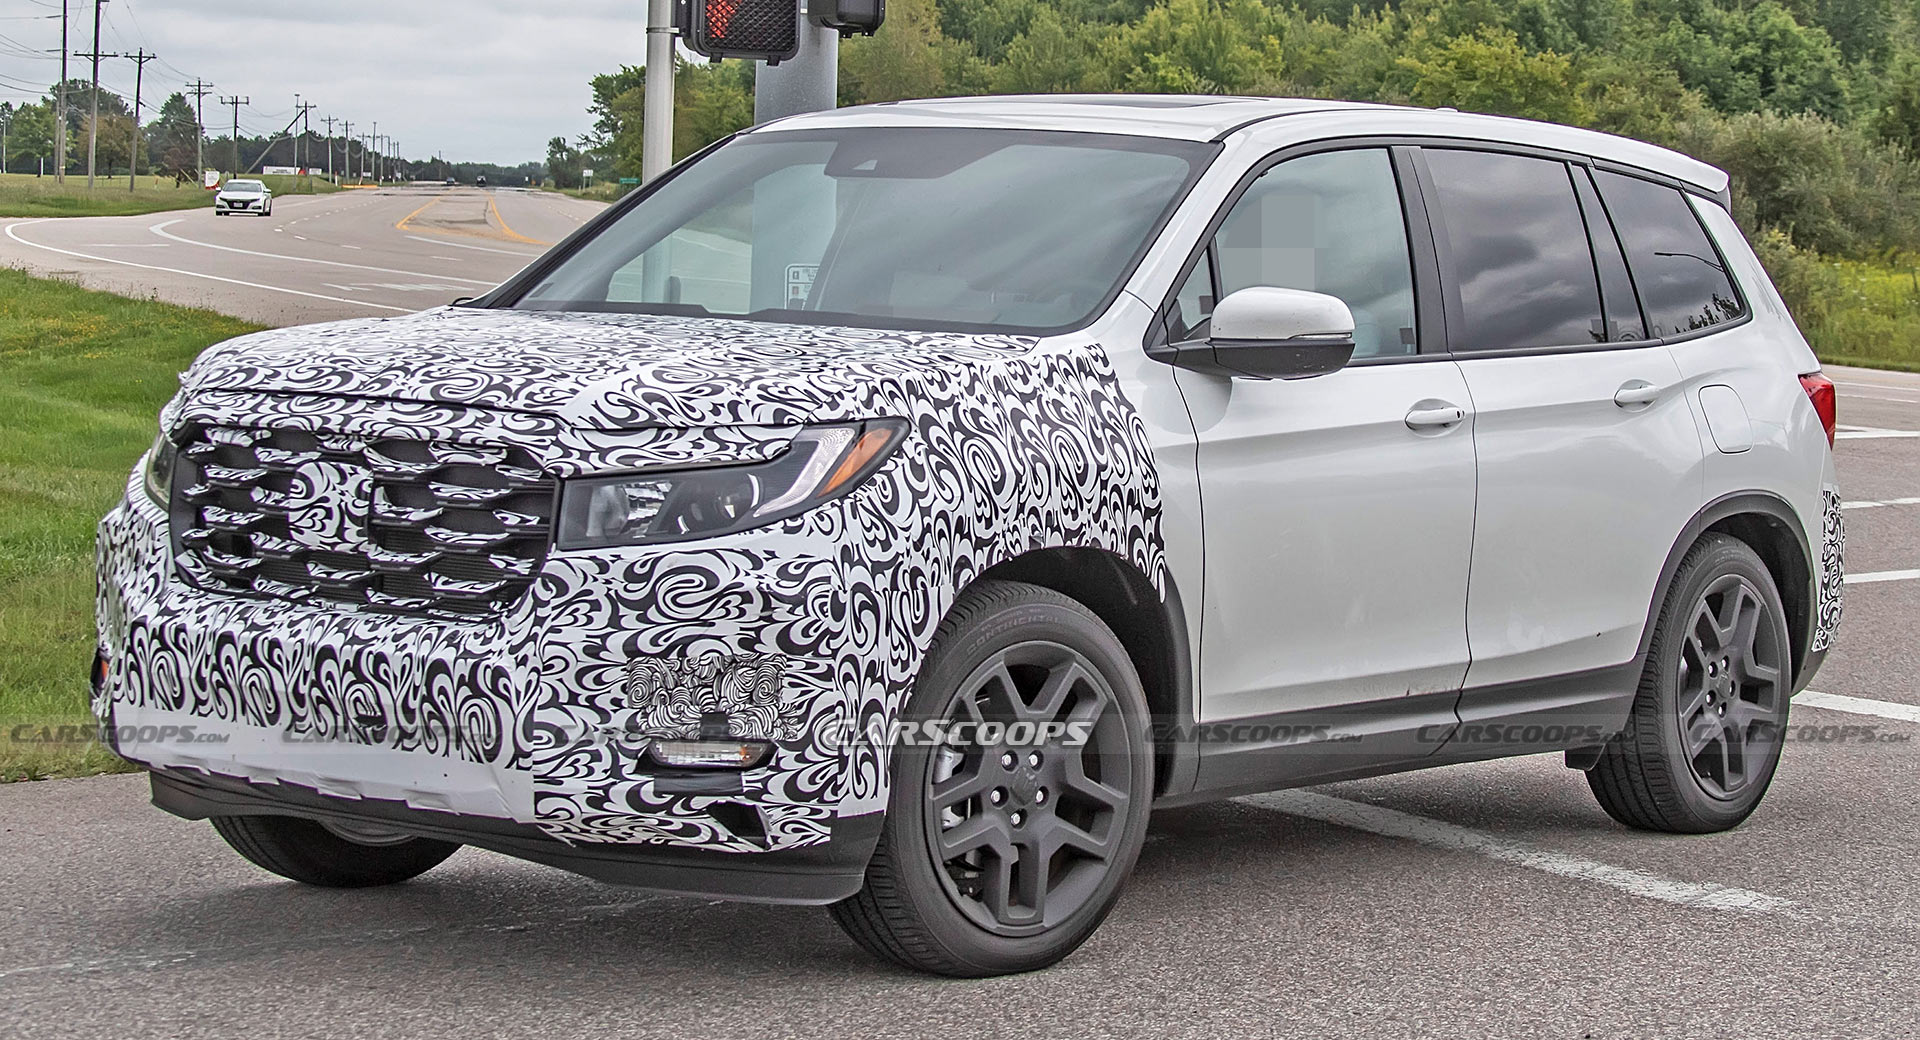 2023 Honda Passport Spied With A More Rugged Look | Carscoops